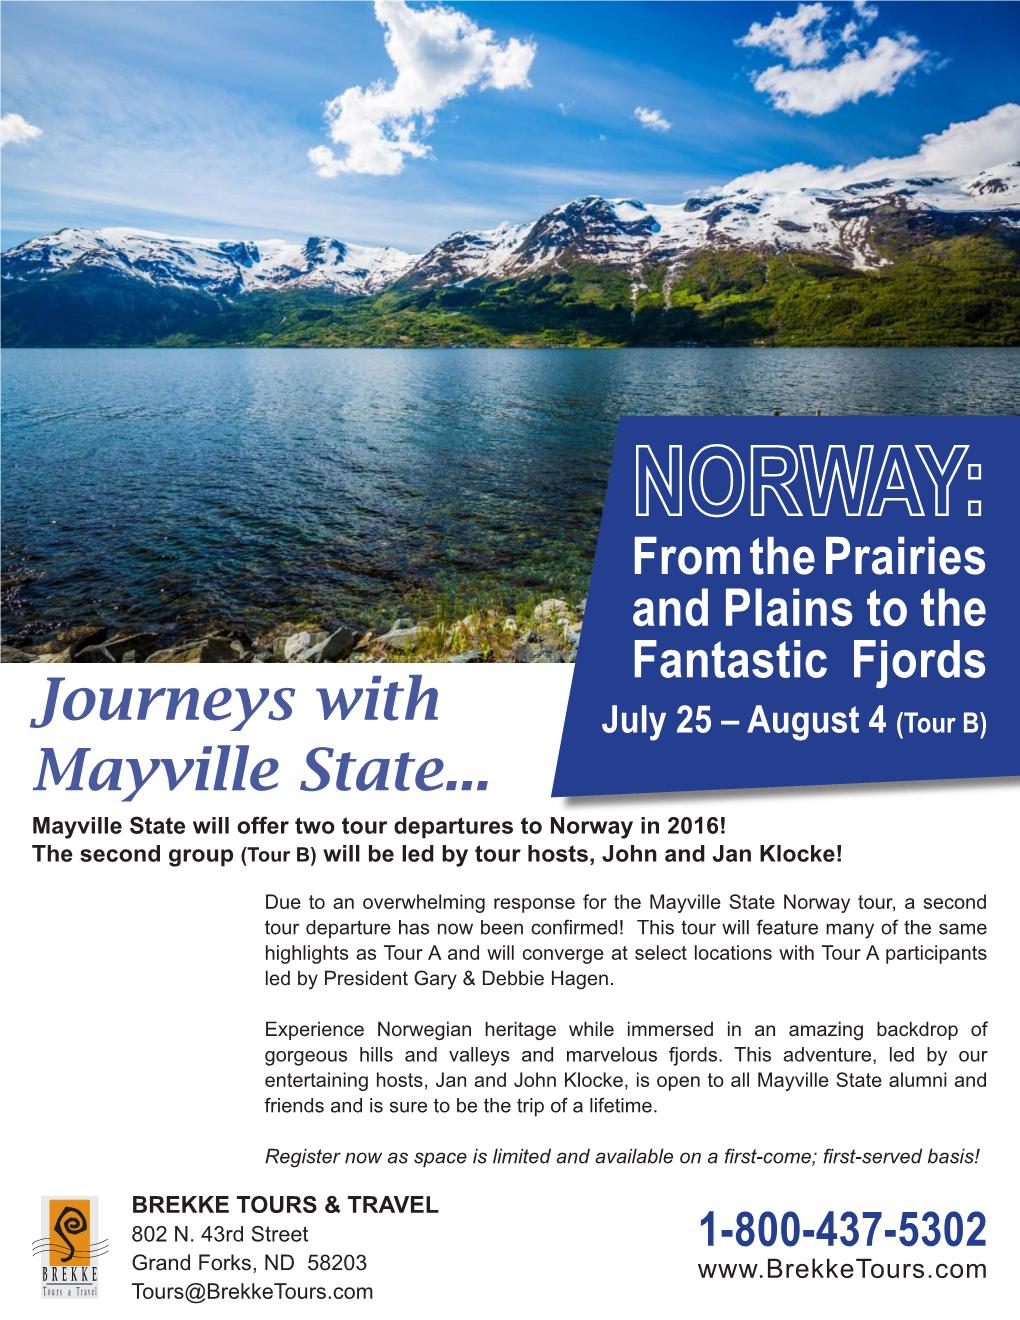 Journeys with Mayville State